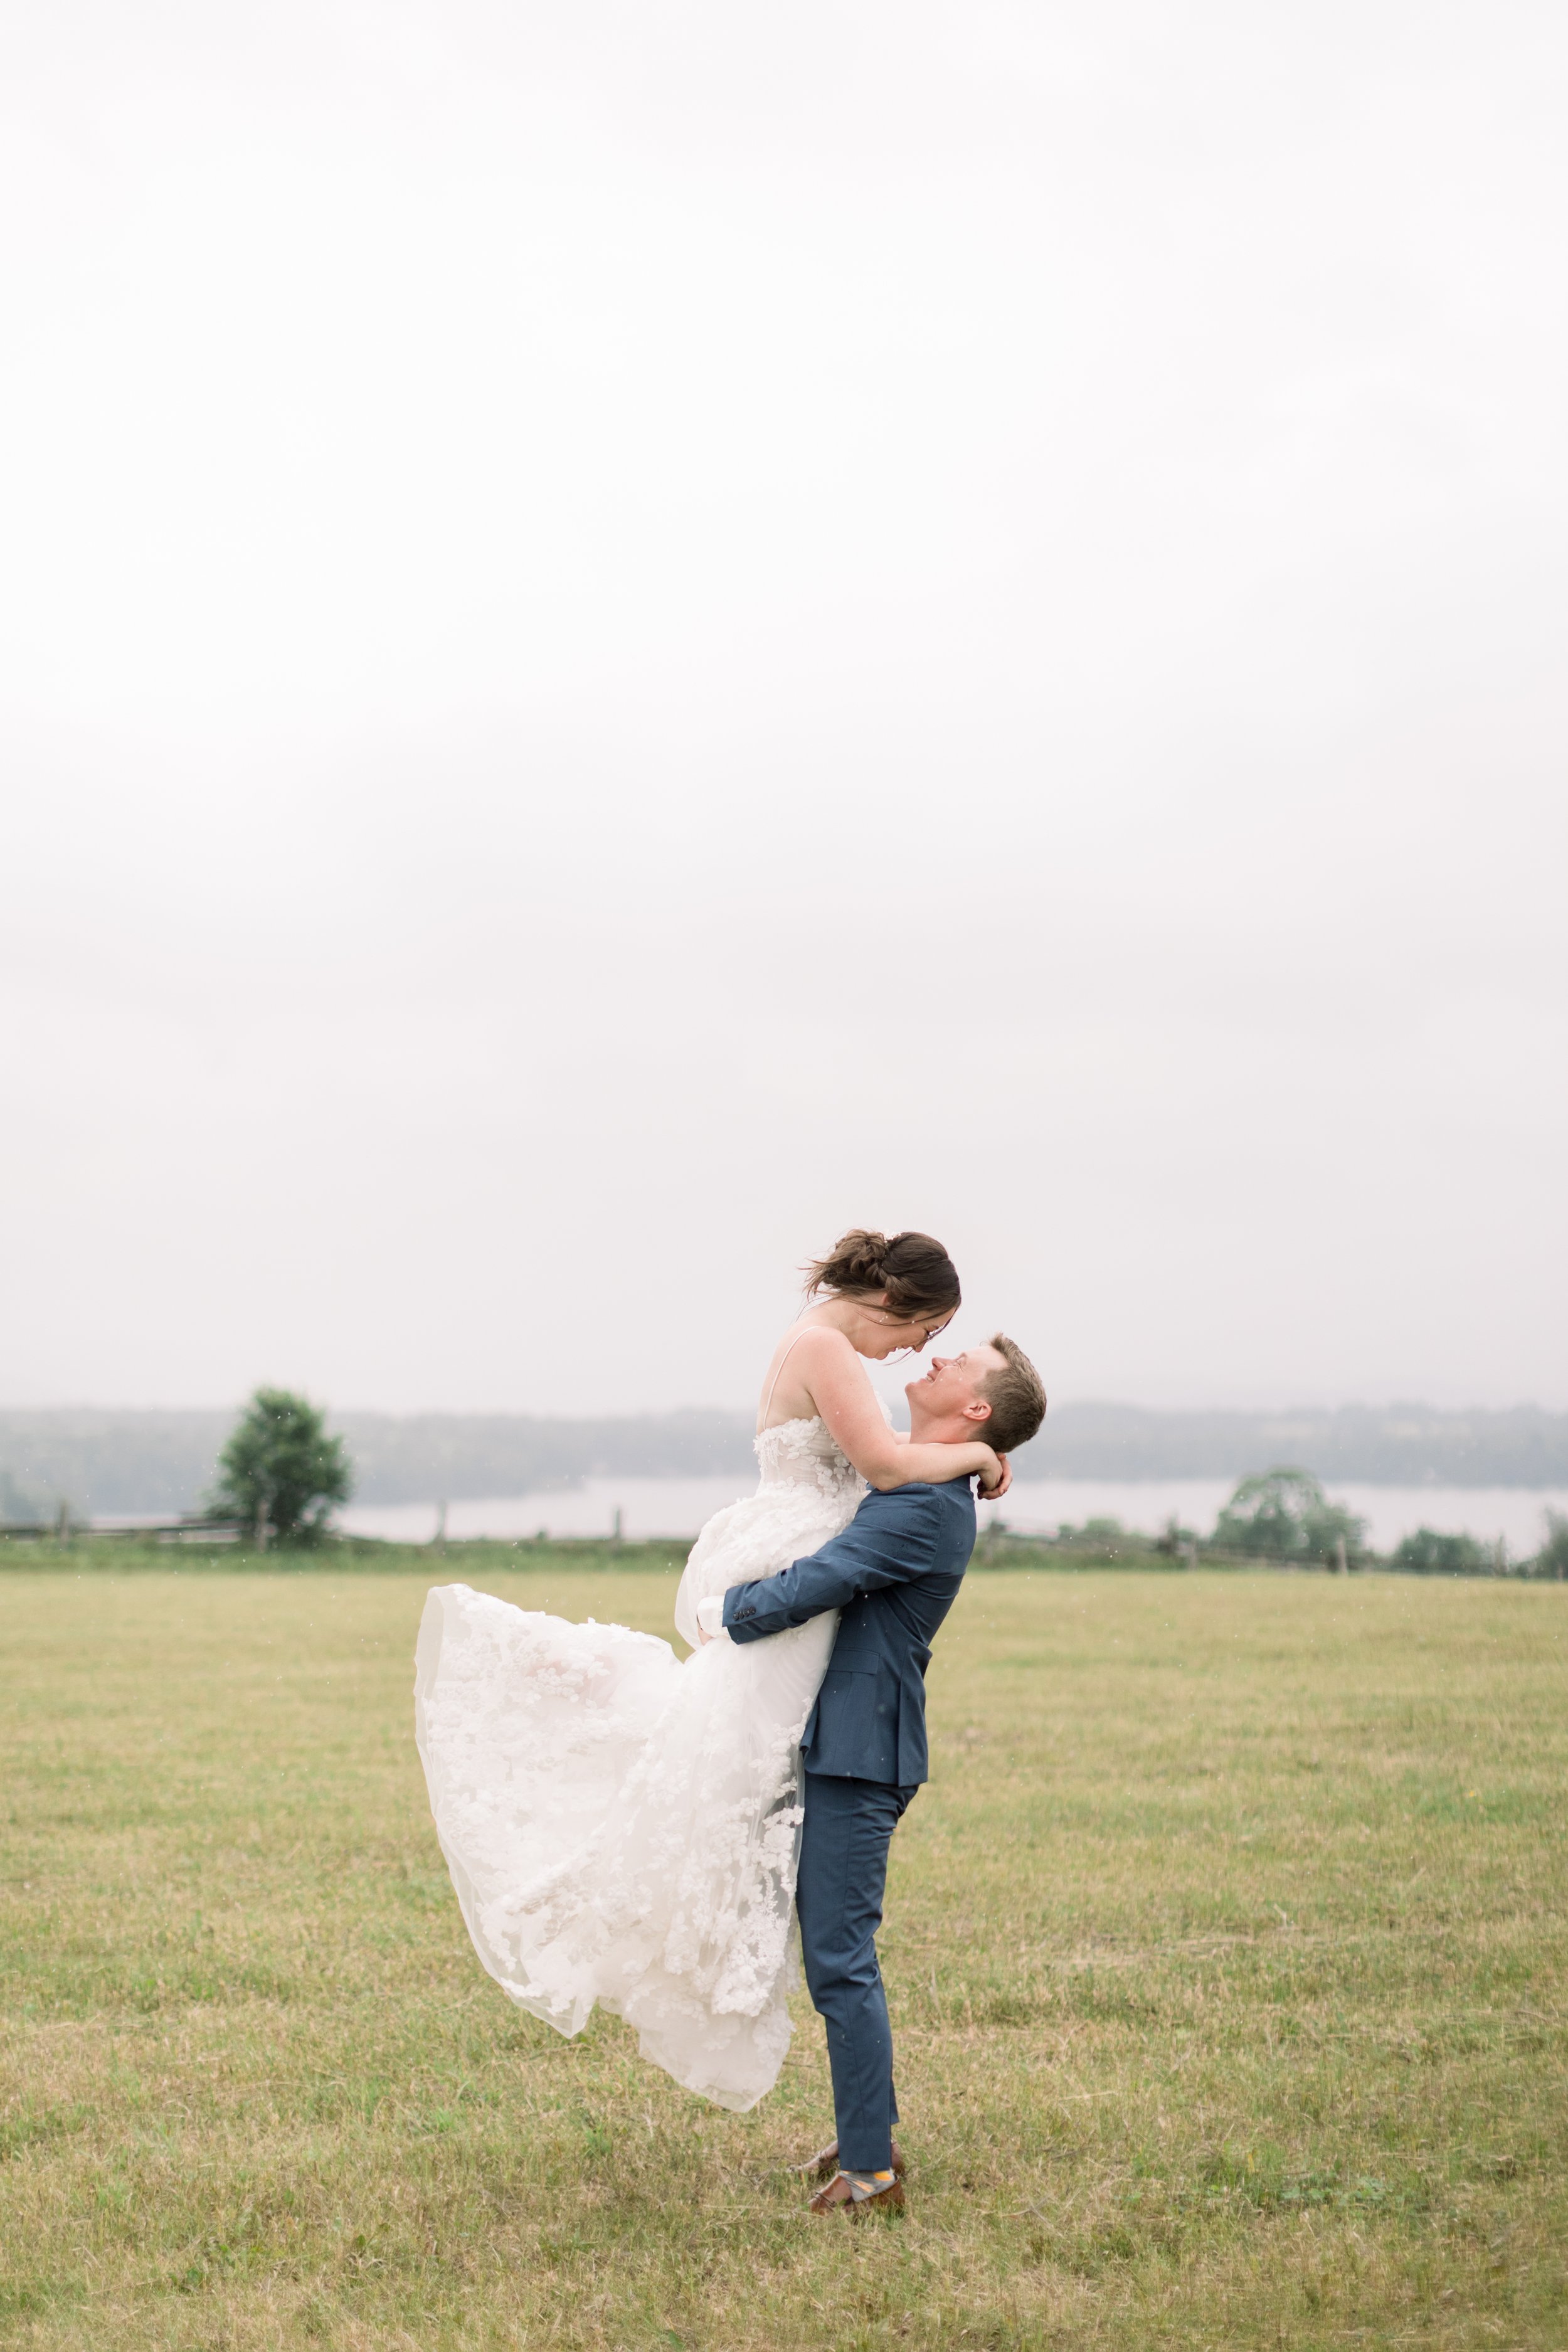  Groom holds his bride up in the air and kisses her by Chelsea Mason Photography. foot pop wedding kiss summer wedding in Canada stormy wed #chelseamasonphotography #chelseamasonweddings #Ontarioweddings #Boulterweddingphotographer #laceweddinggown 